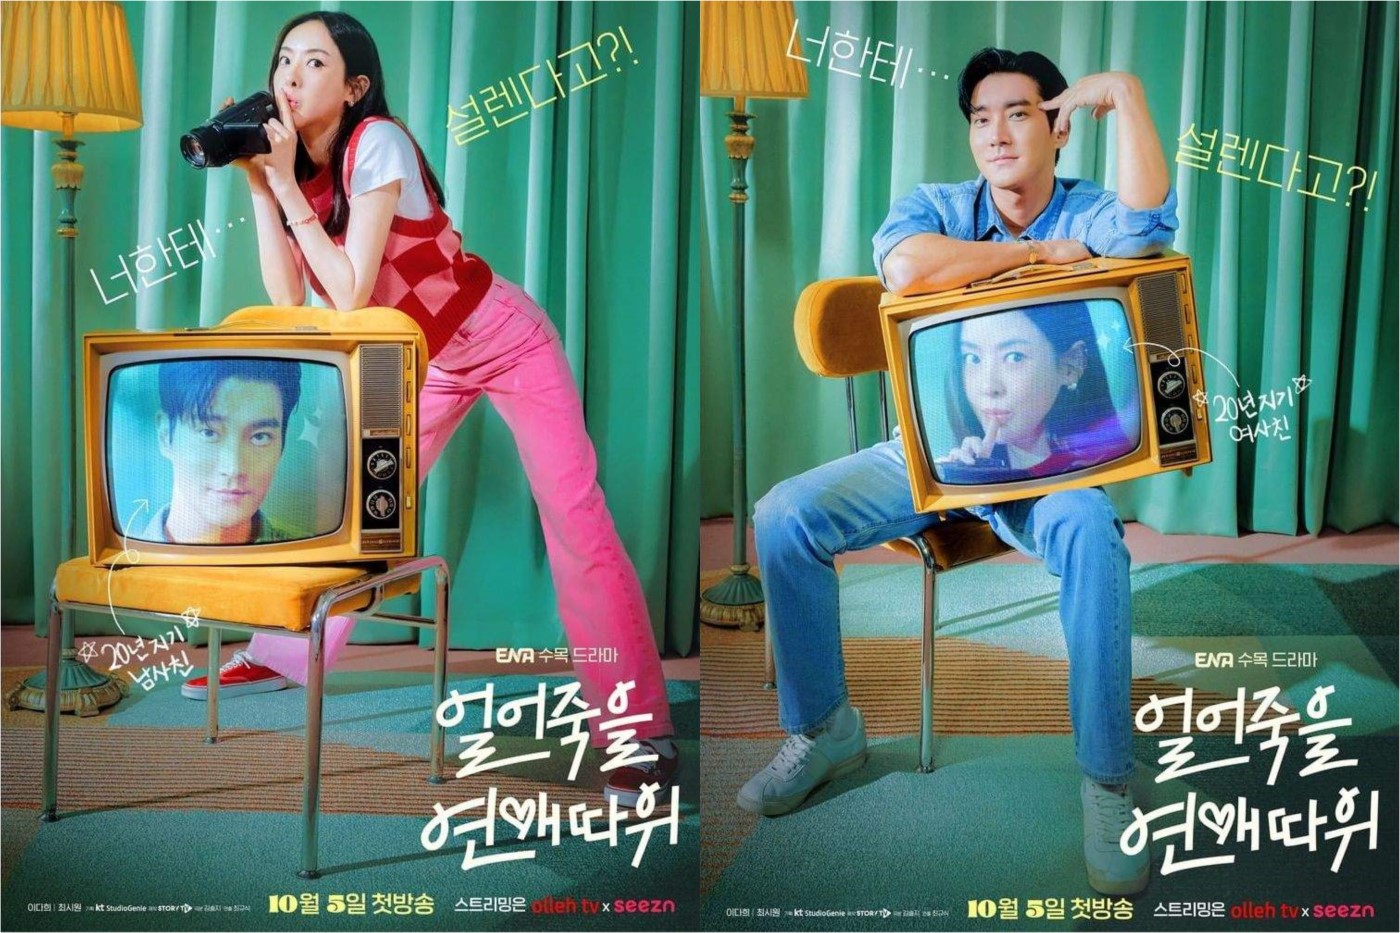 Lee Da-hee and Choi Siwon fail to prove that Love is for Suckers